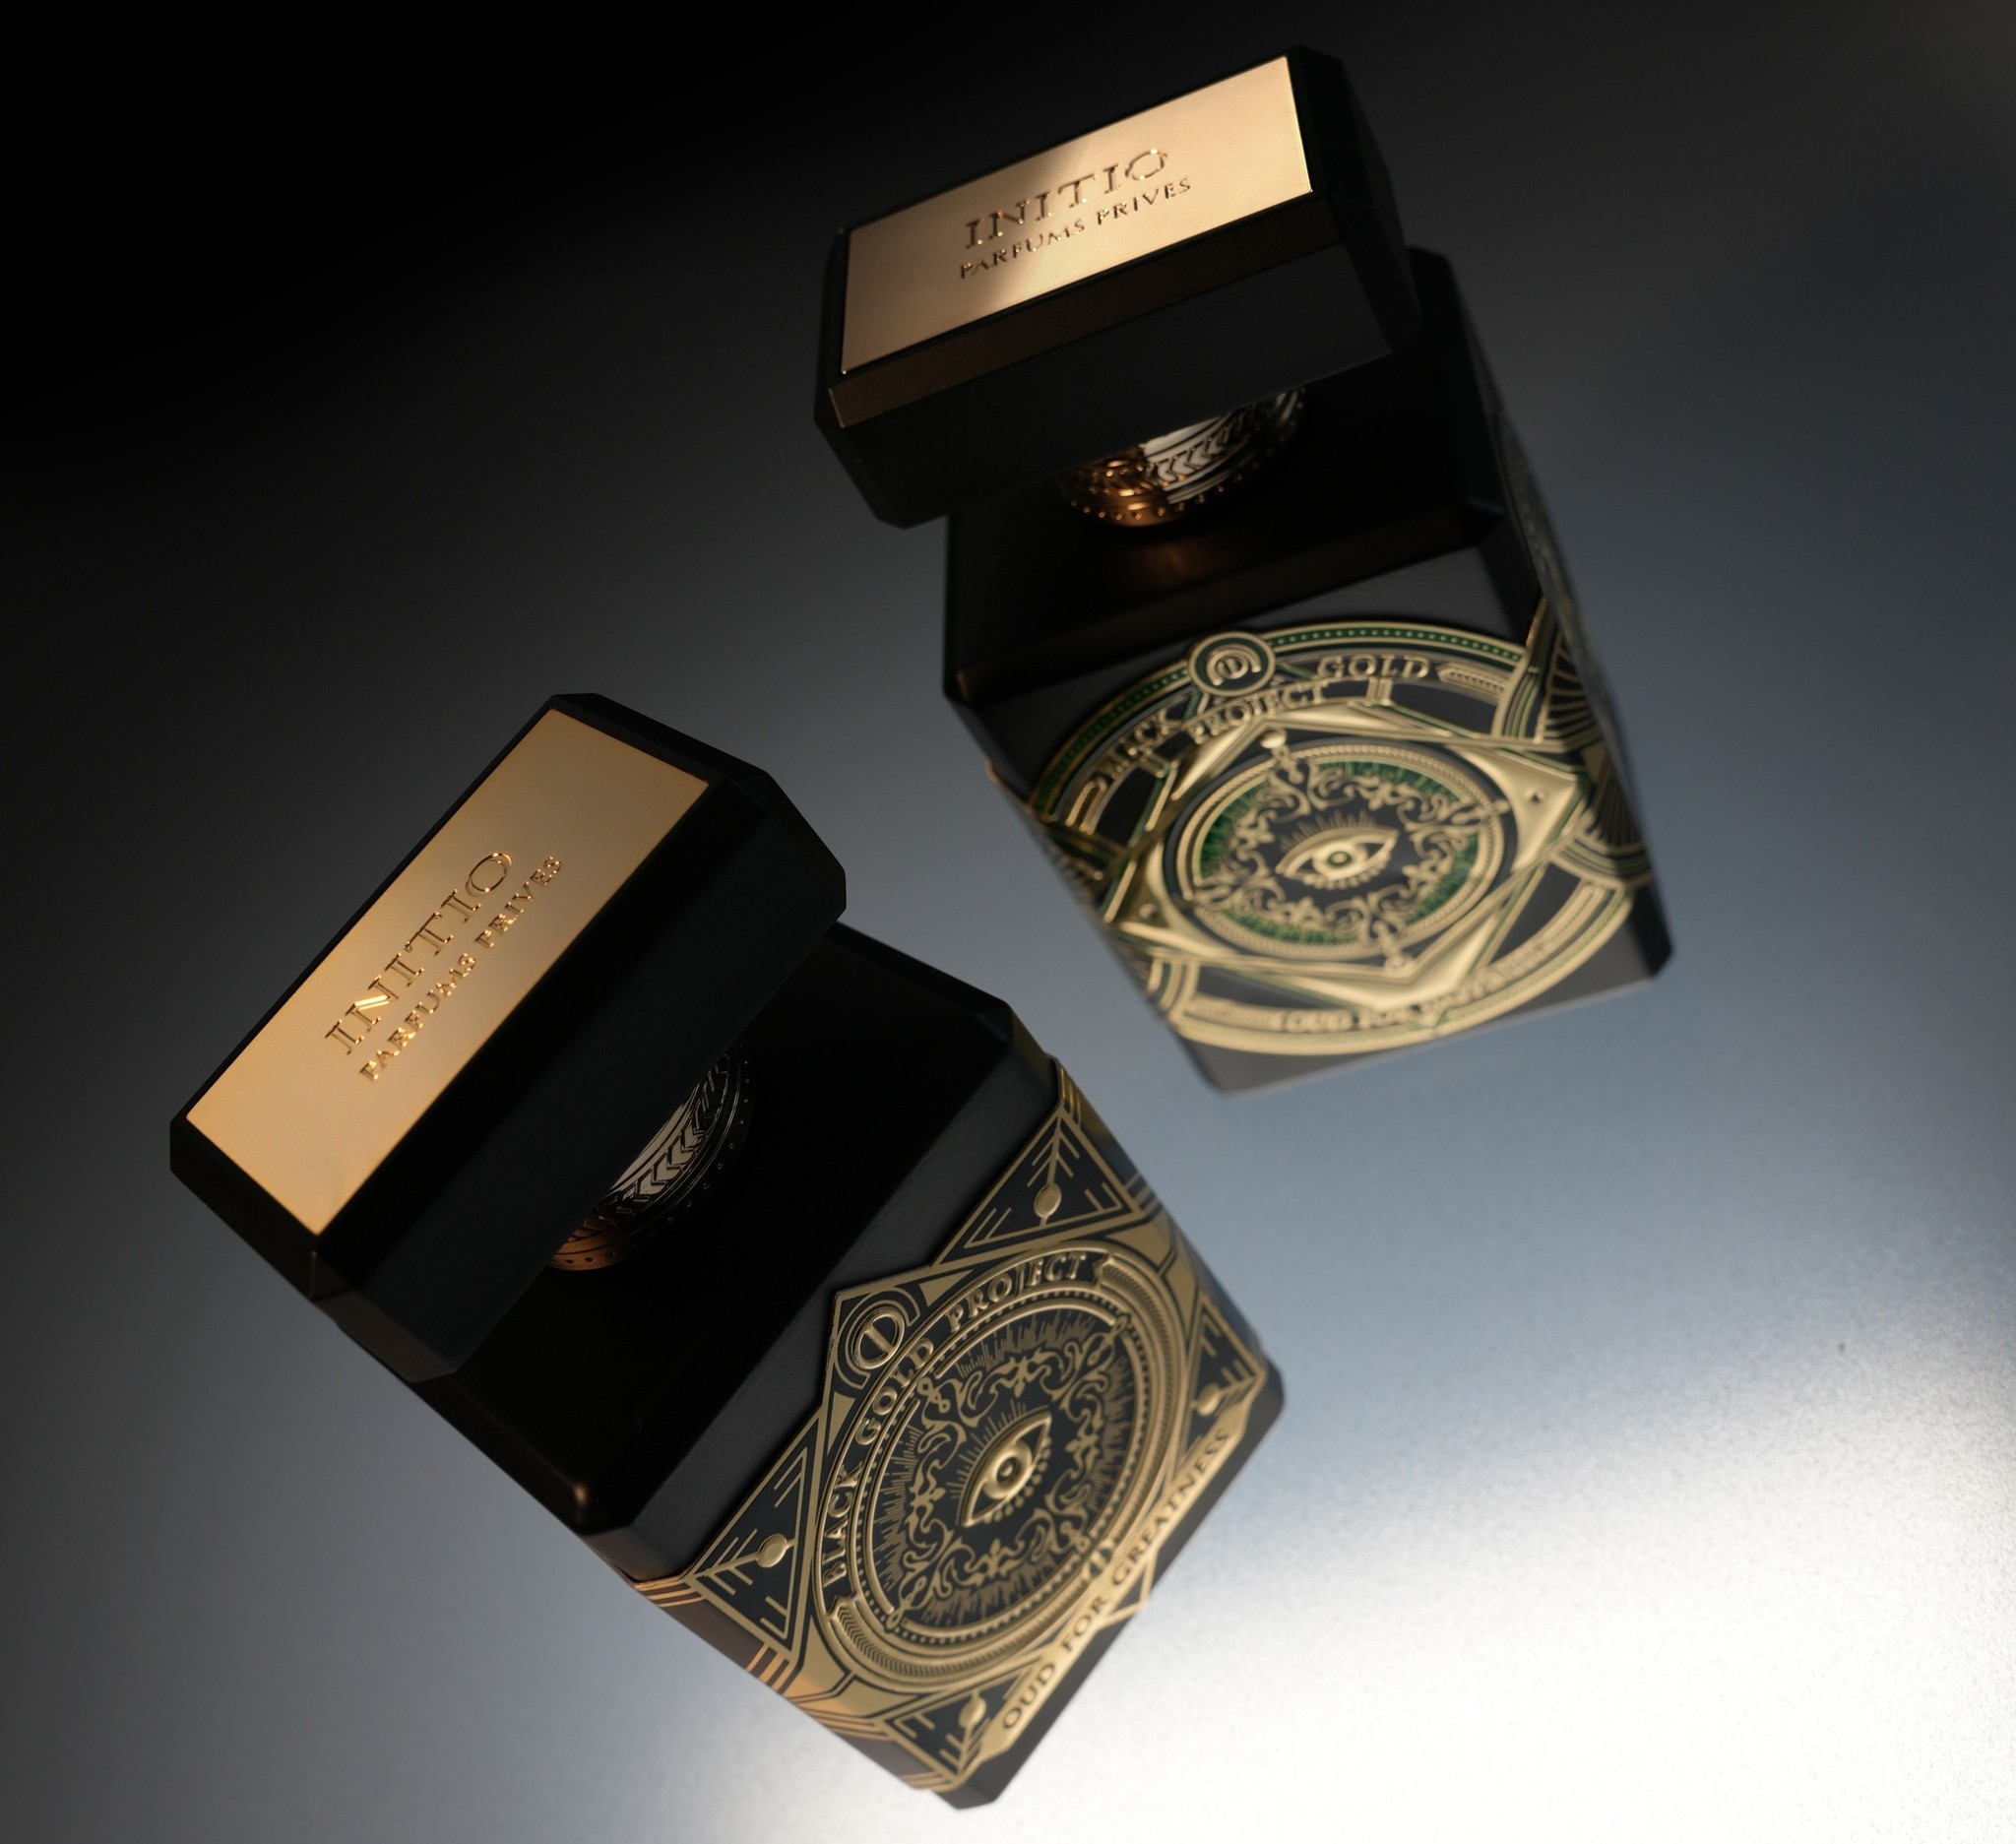 Oud for Greatness NEO: The Latest From Initio Parfums Privés